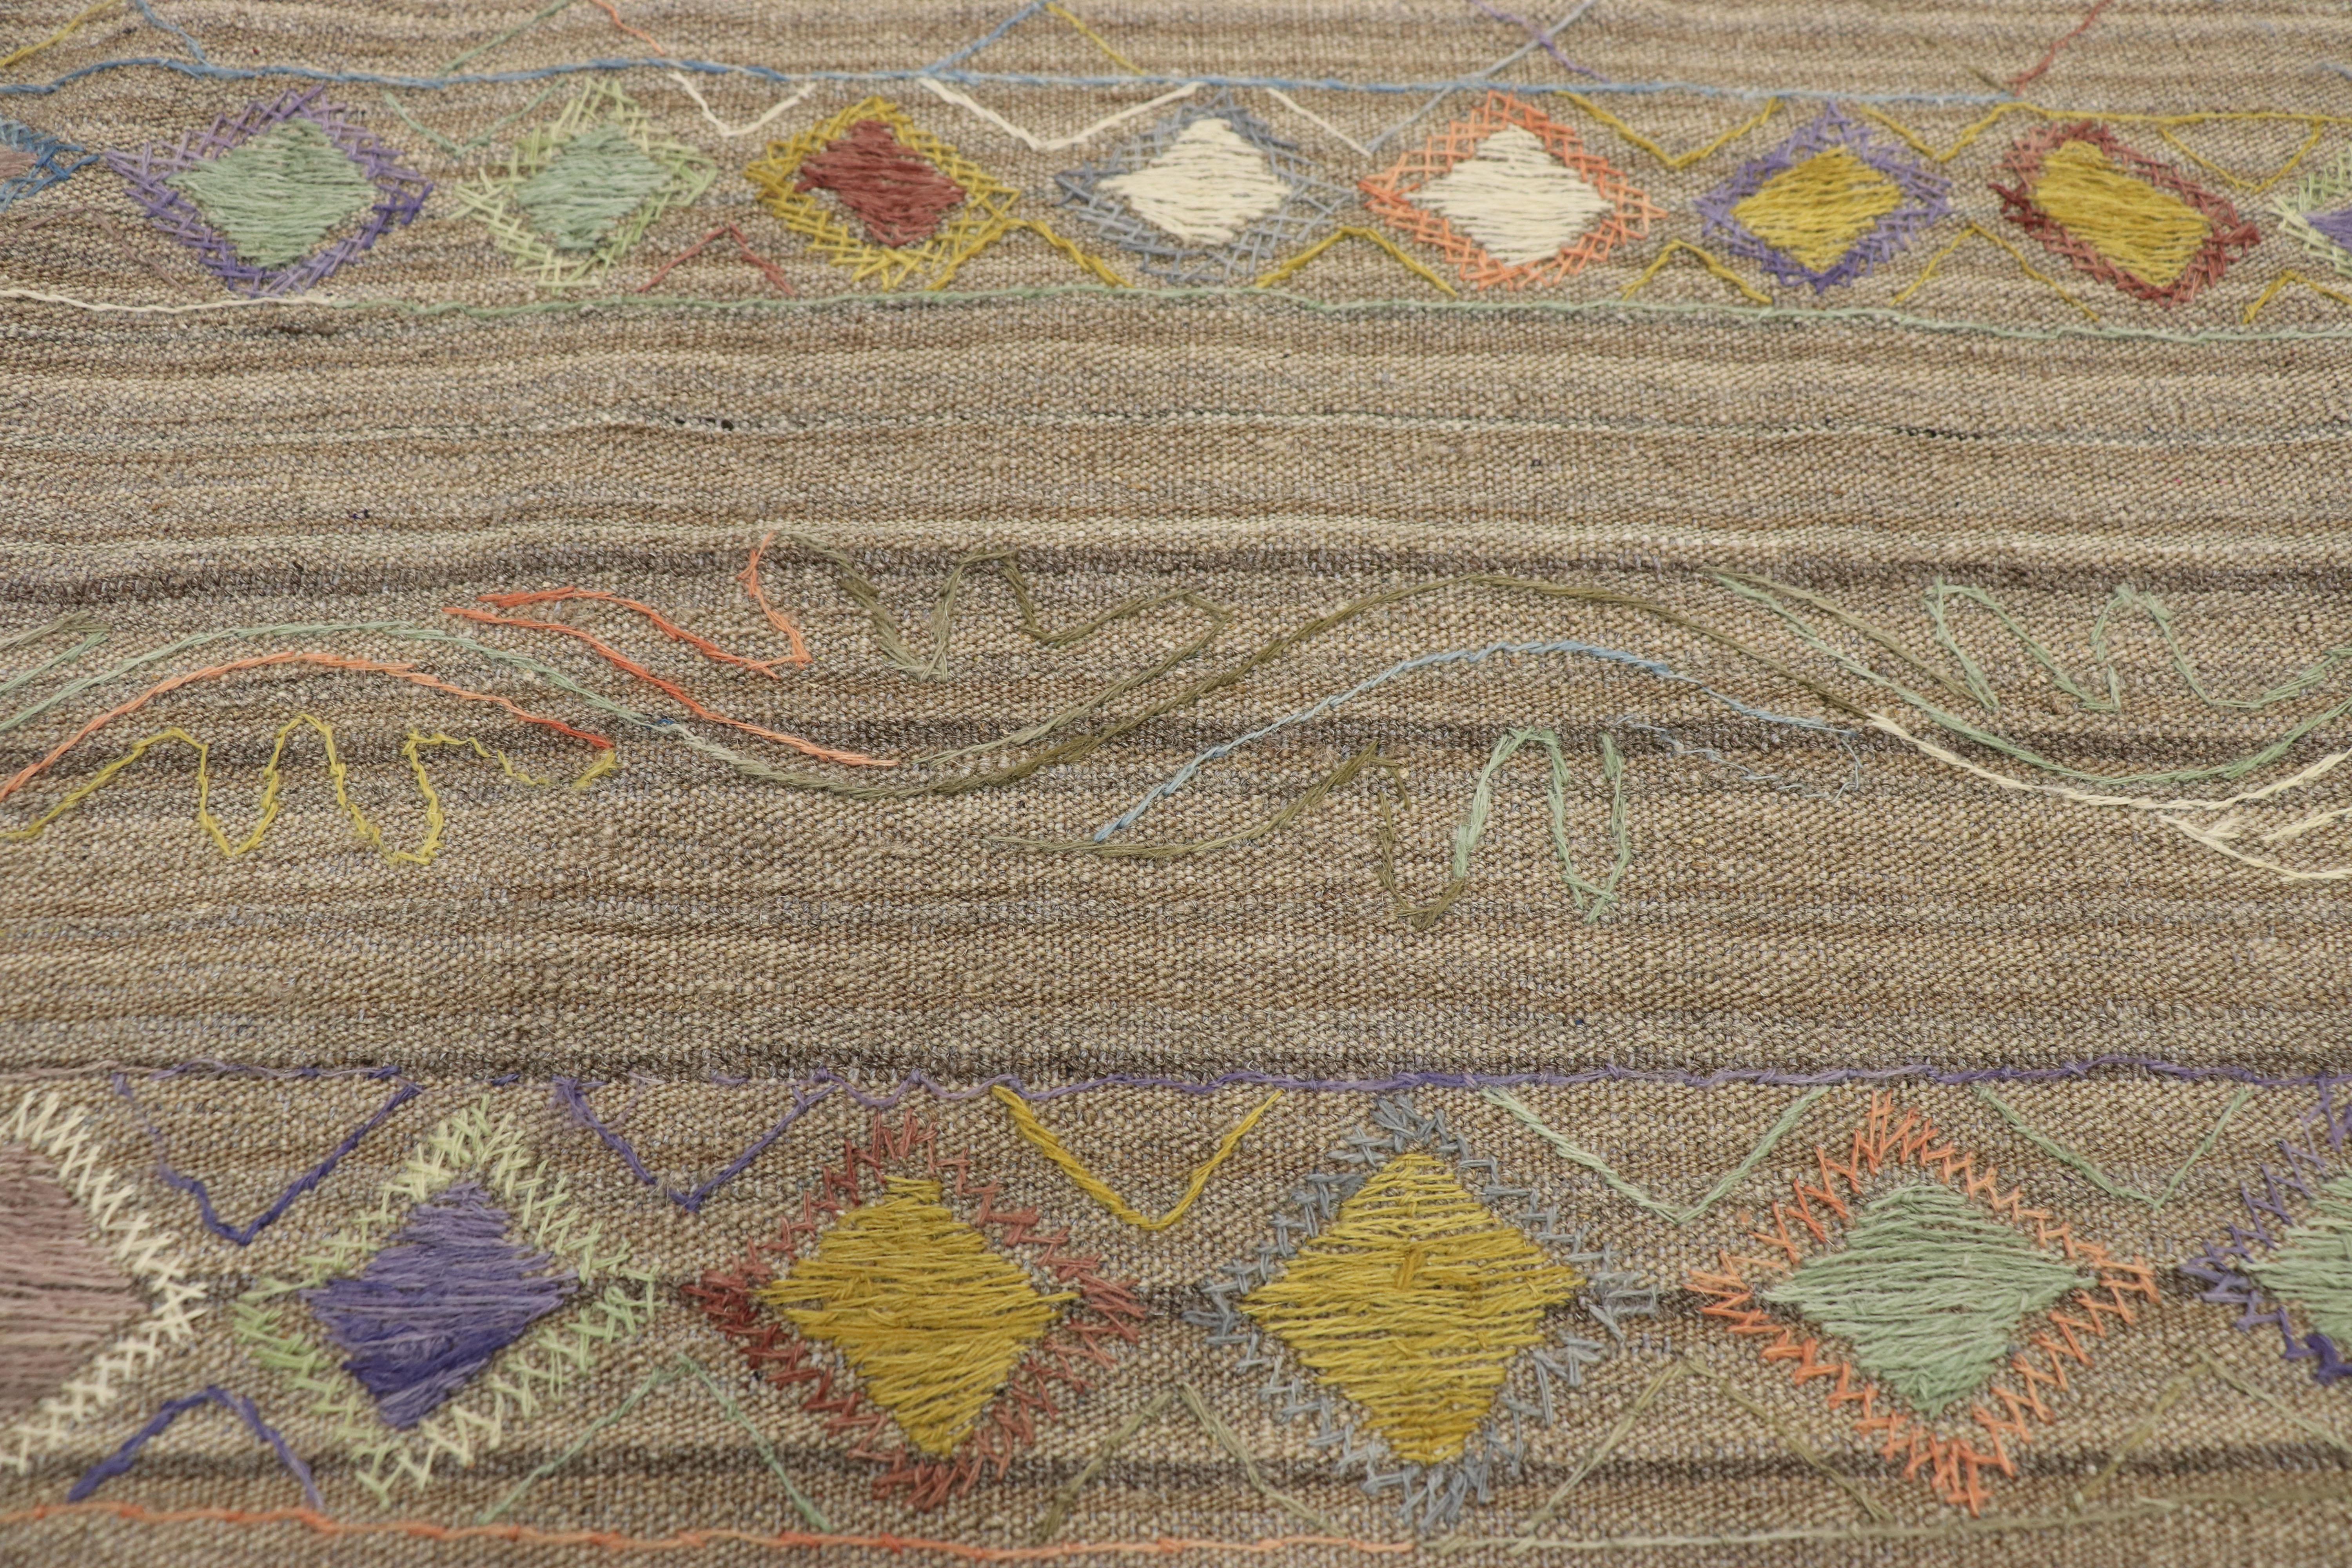 Vintage Afghan Uzbek Suzani Embroidered Kilim Rug with Bohemian Style In Good Condition For Sale In Dallas, TX